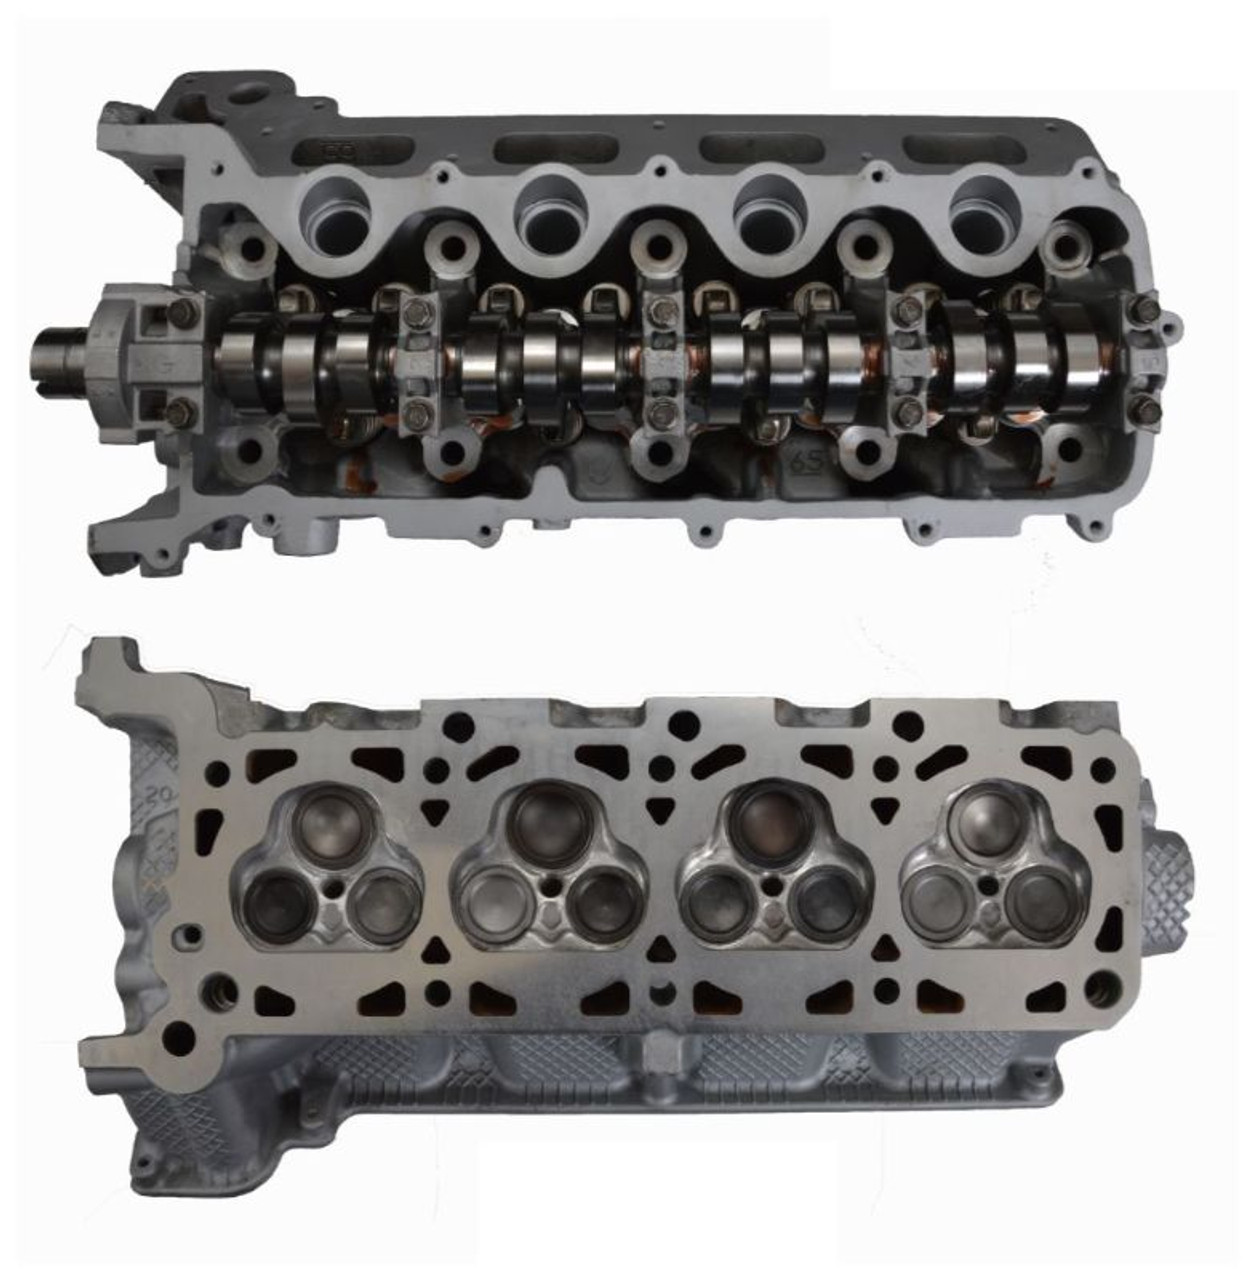 2008 Lincoln Mark LT 5.4L Engine Cylinder Head Assembly CH1039R -25